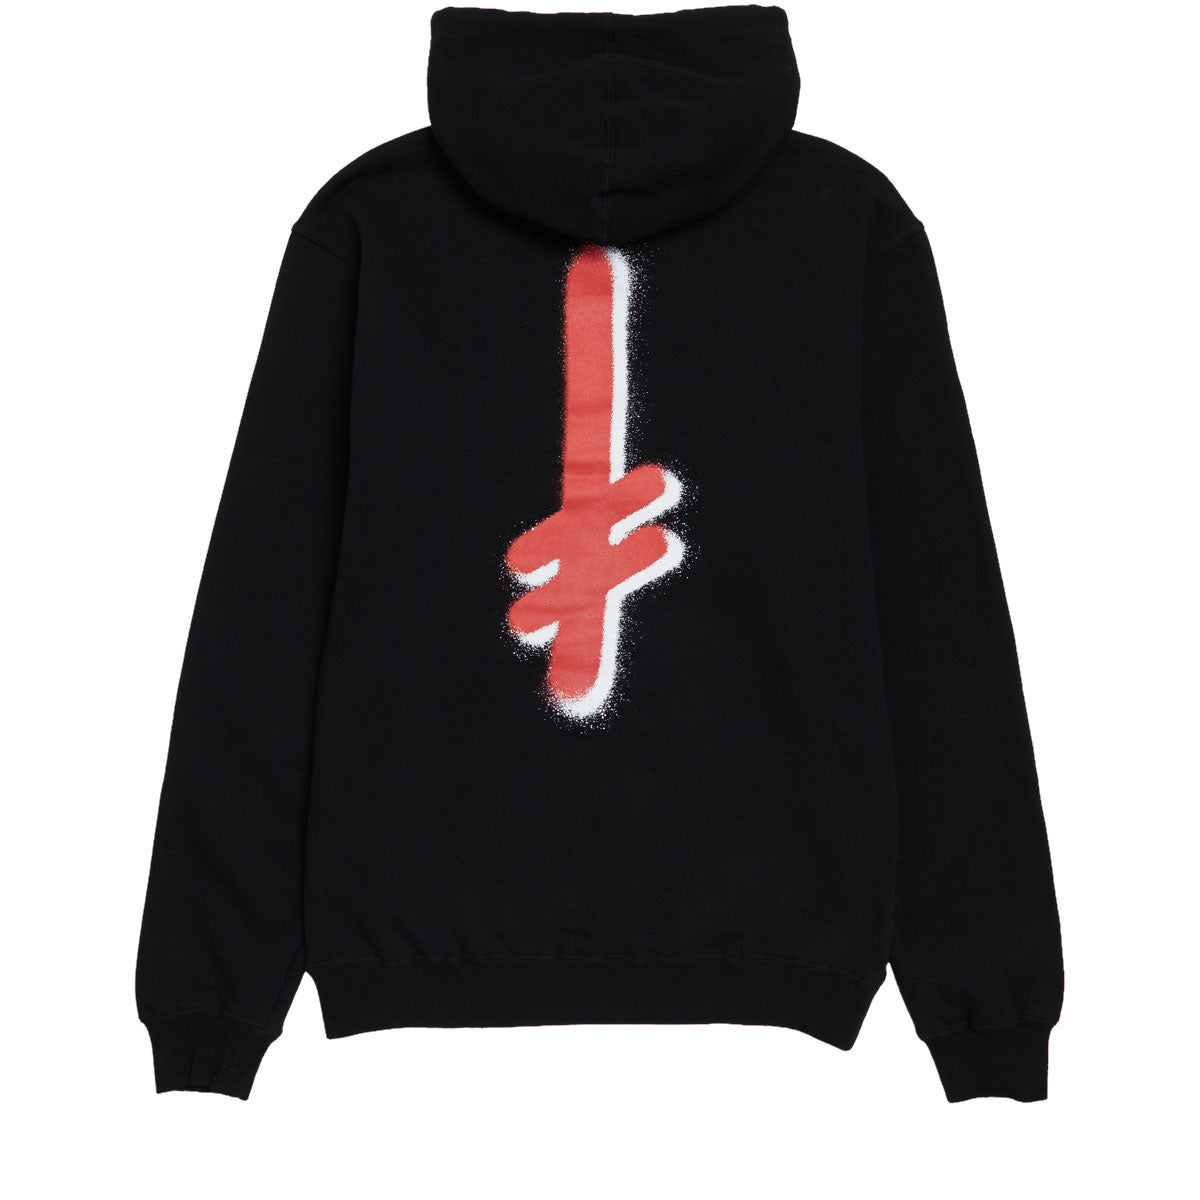 Deathwish The Truth Hoodie - Black/Red image 2